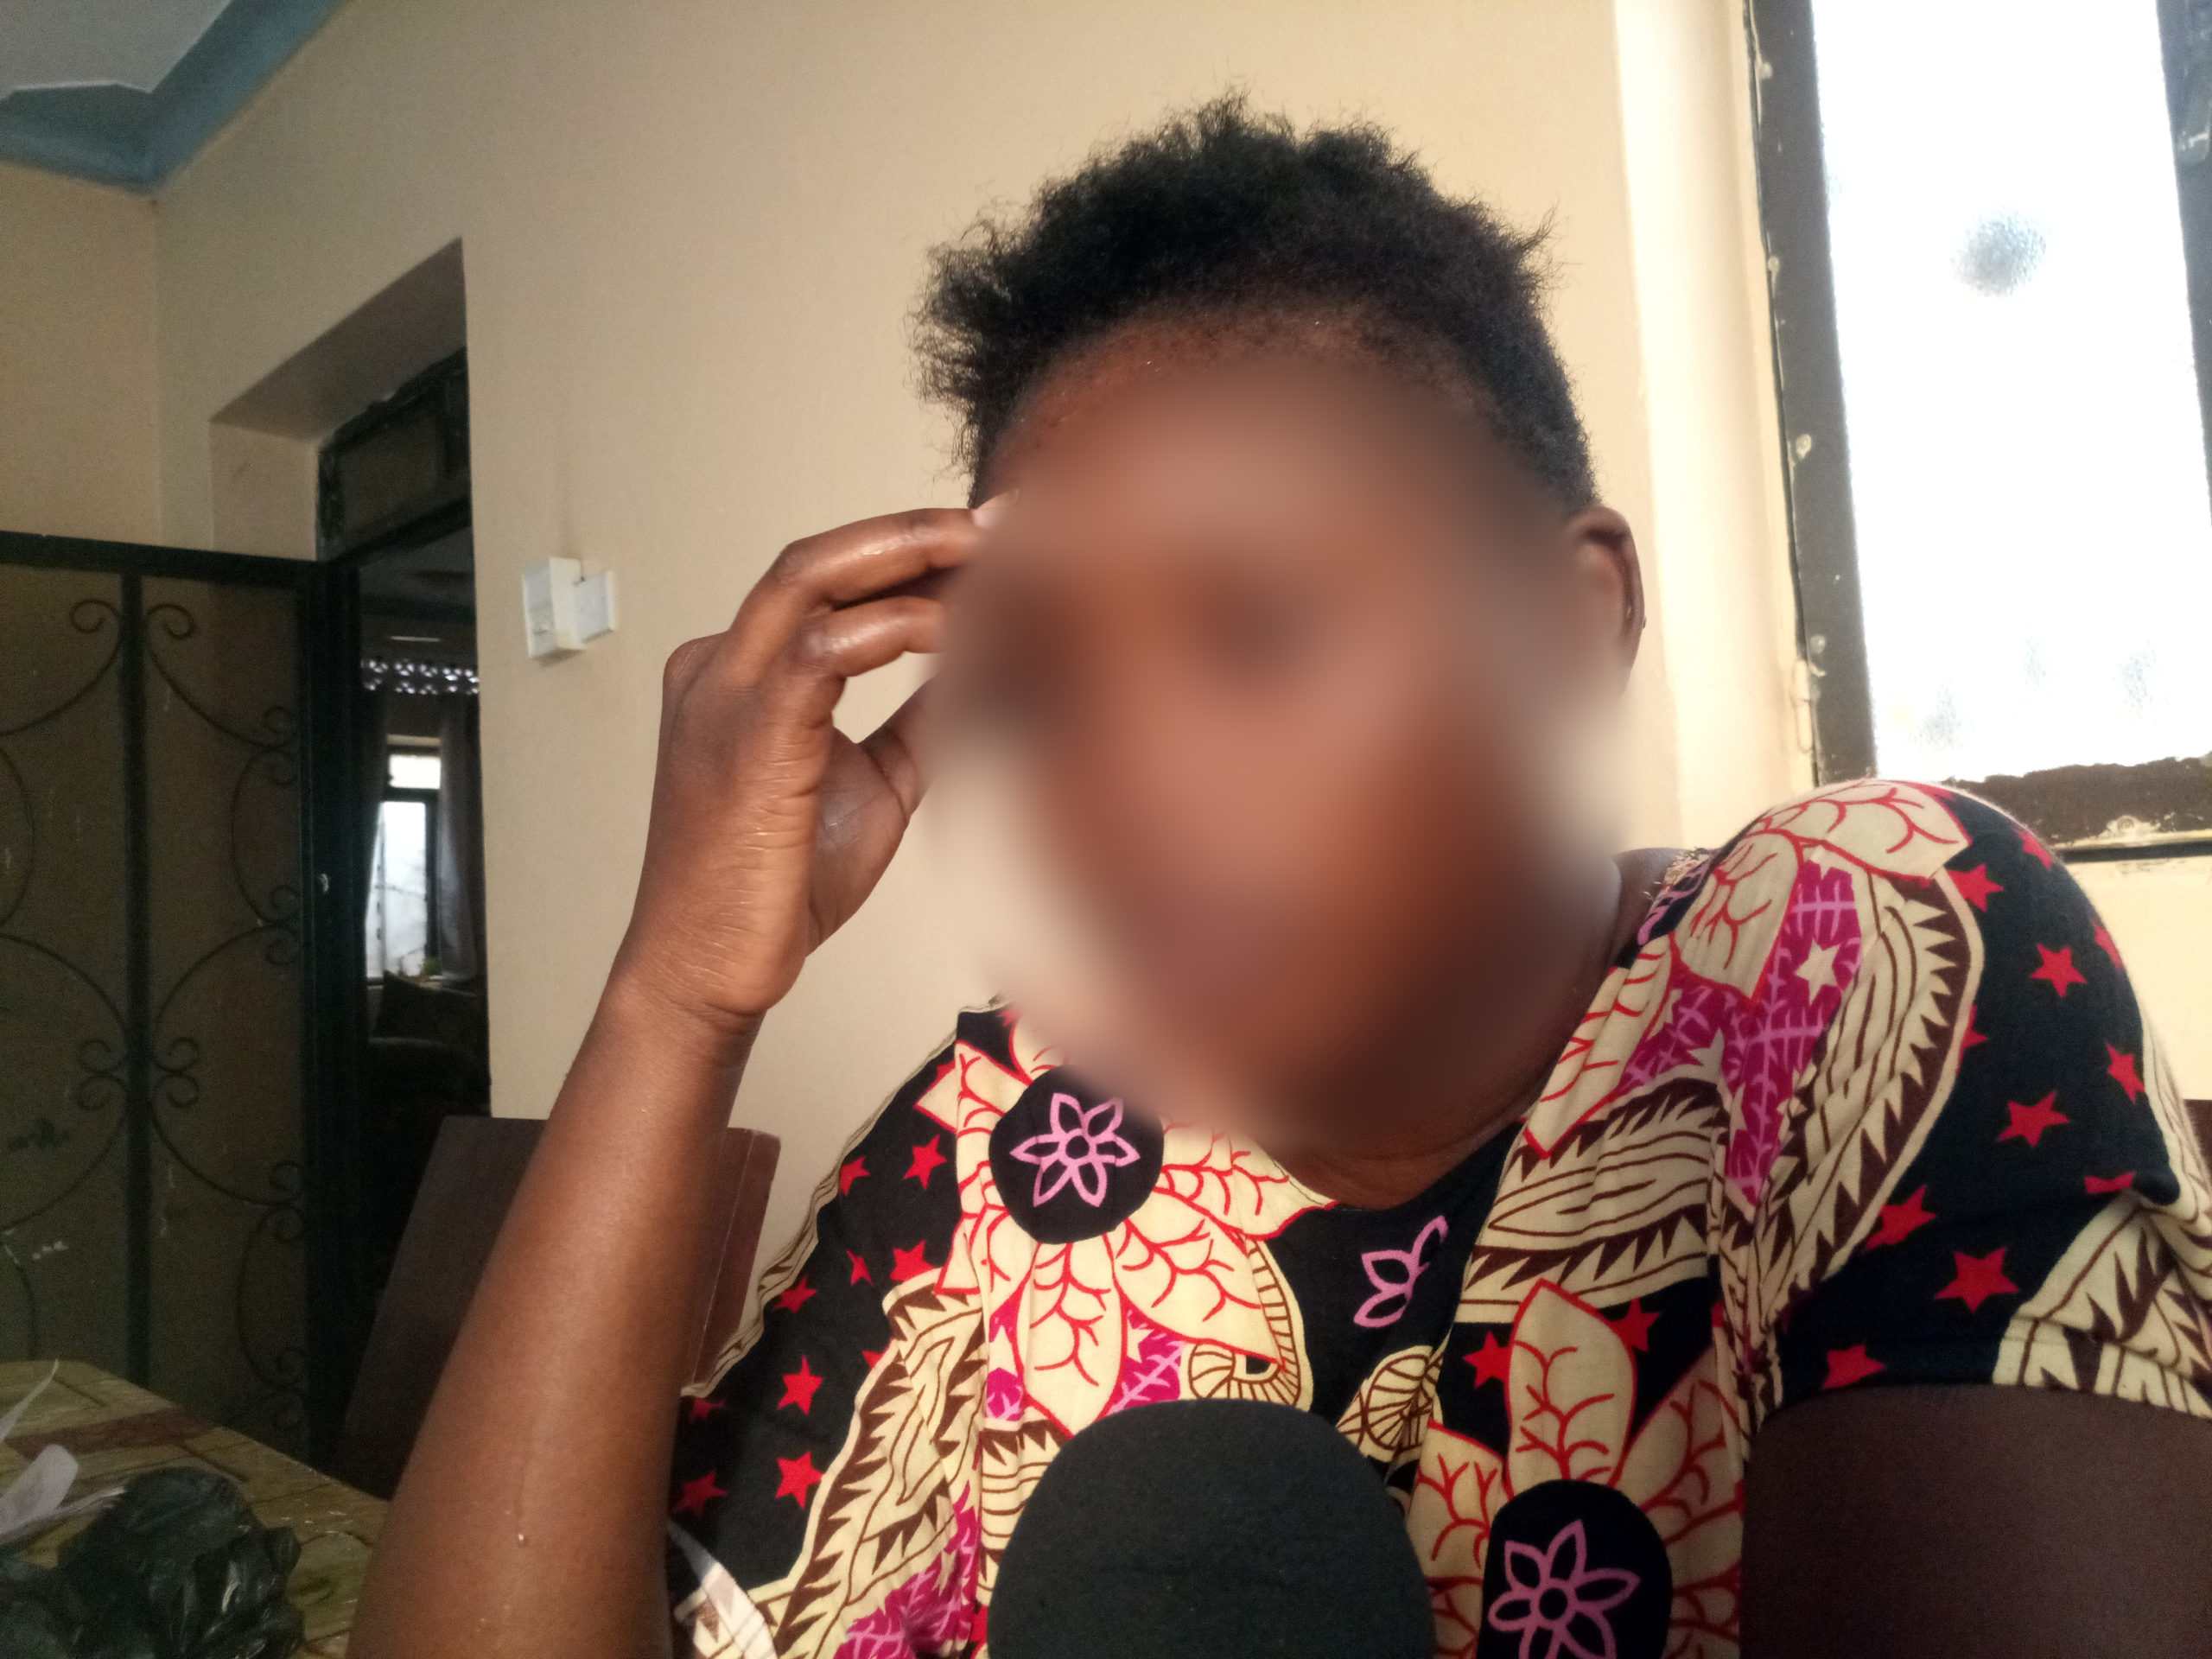 22-year-old lady whose boyfriend ‘bit off her nose’ appeals for help